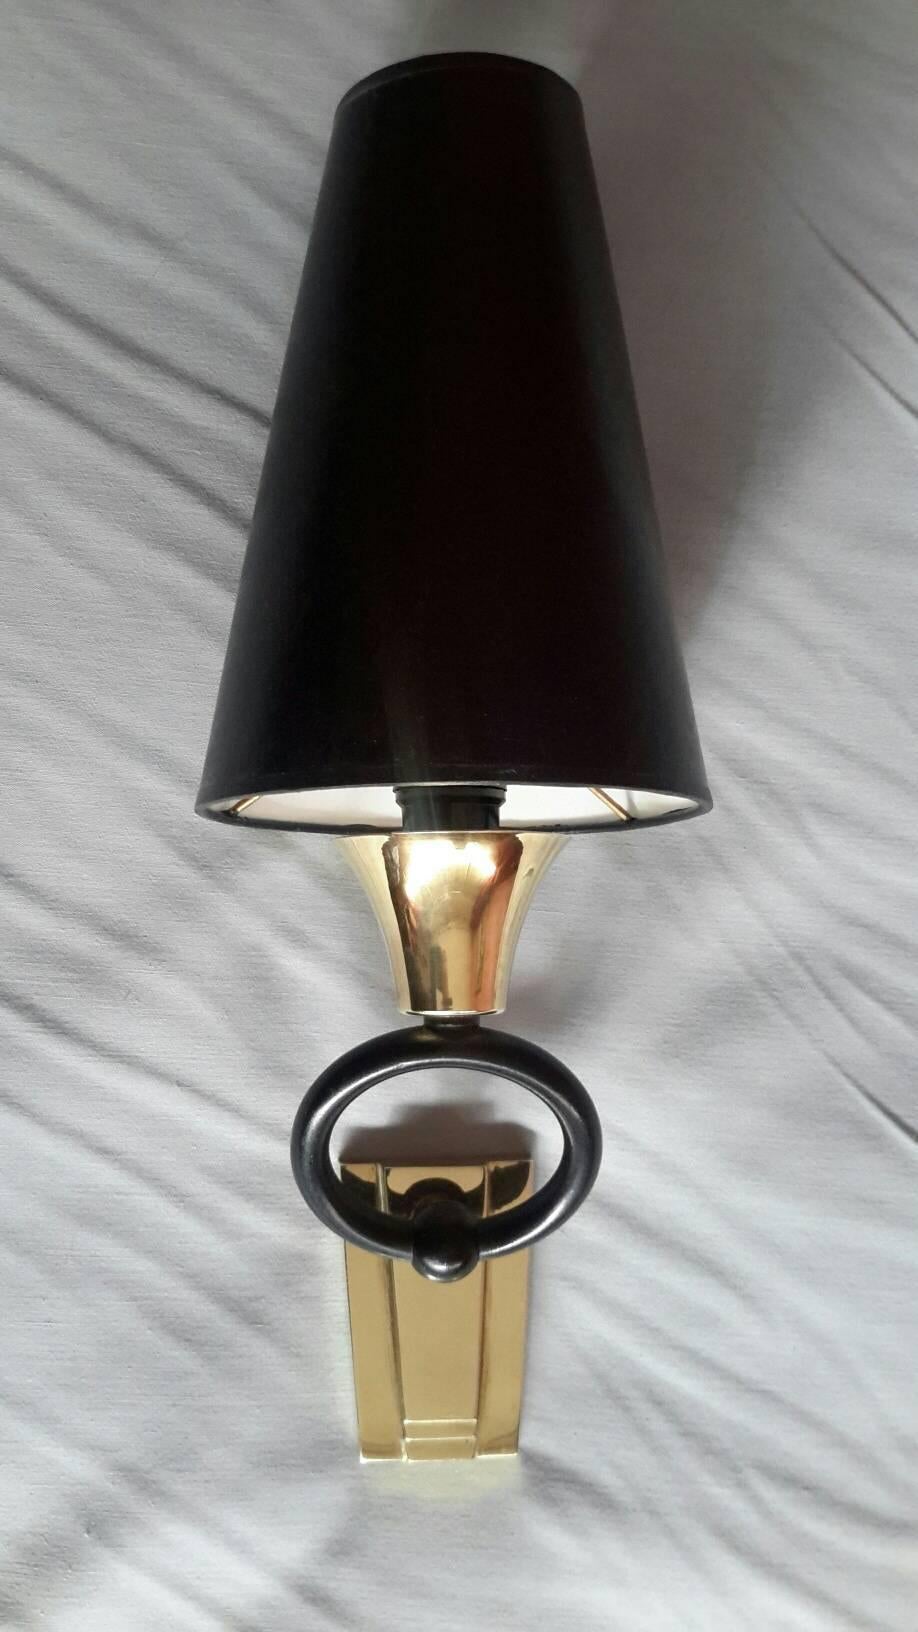 Pair of stylish 1950s French neoclassical sconces, in bronze, black lacquered ring and brass with black hardboard lampshade in the style of Maison Jansen.
The pair of sconces is in excellent condition, they have been rewired and comply with US